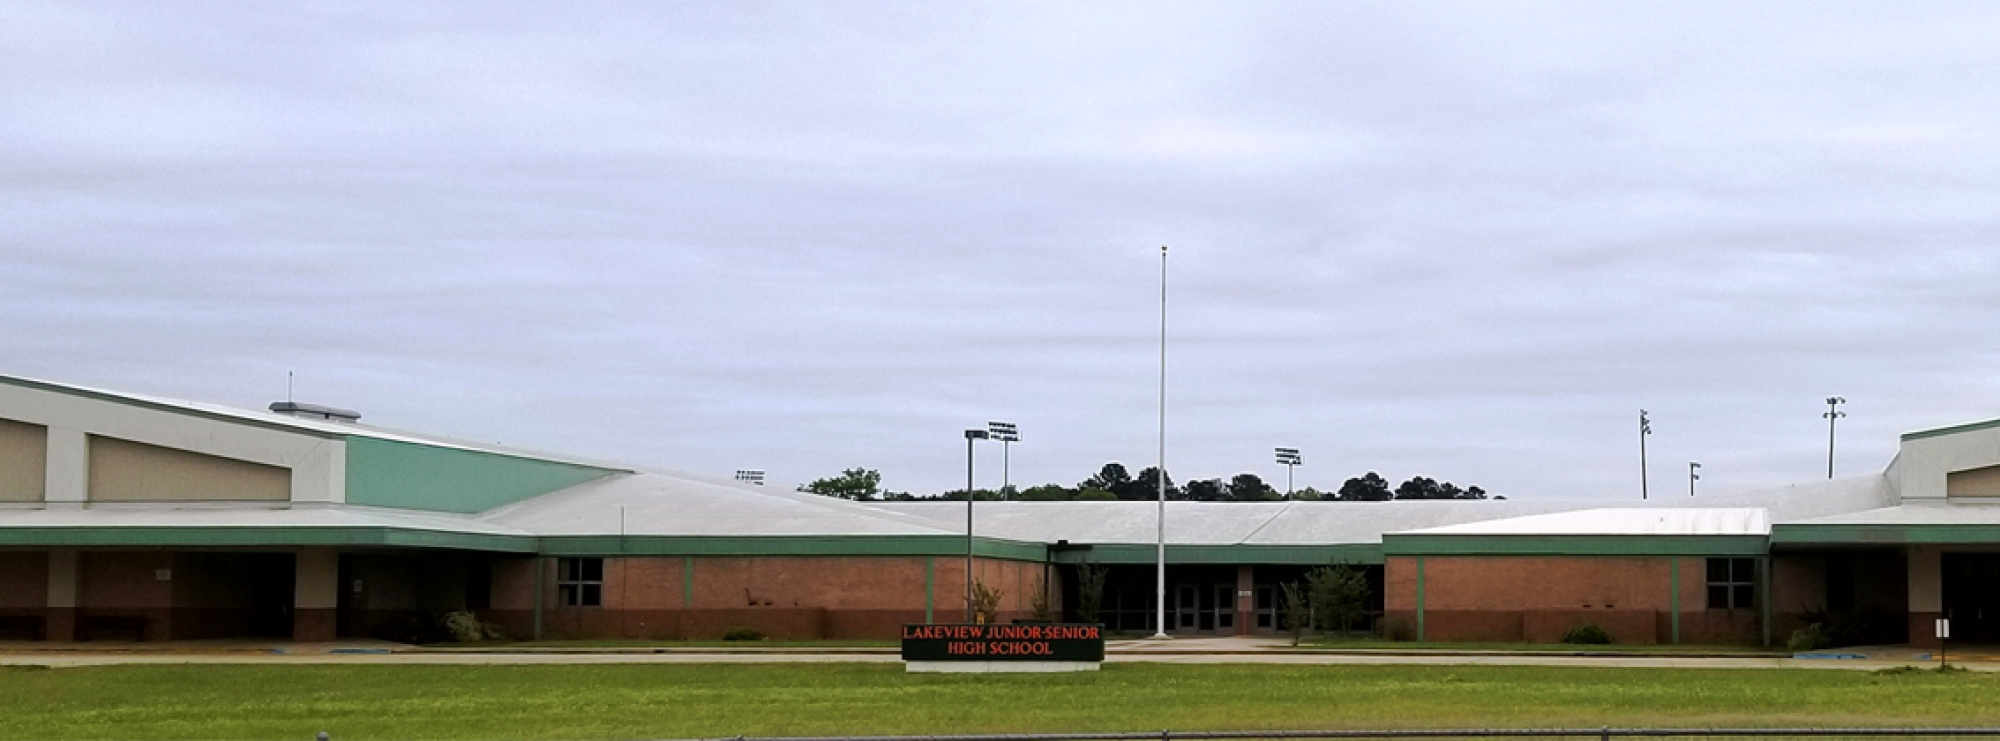 Lakeview High School Outside of Building